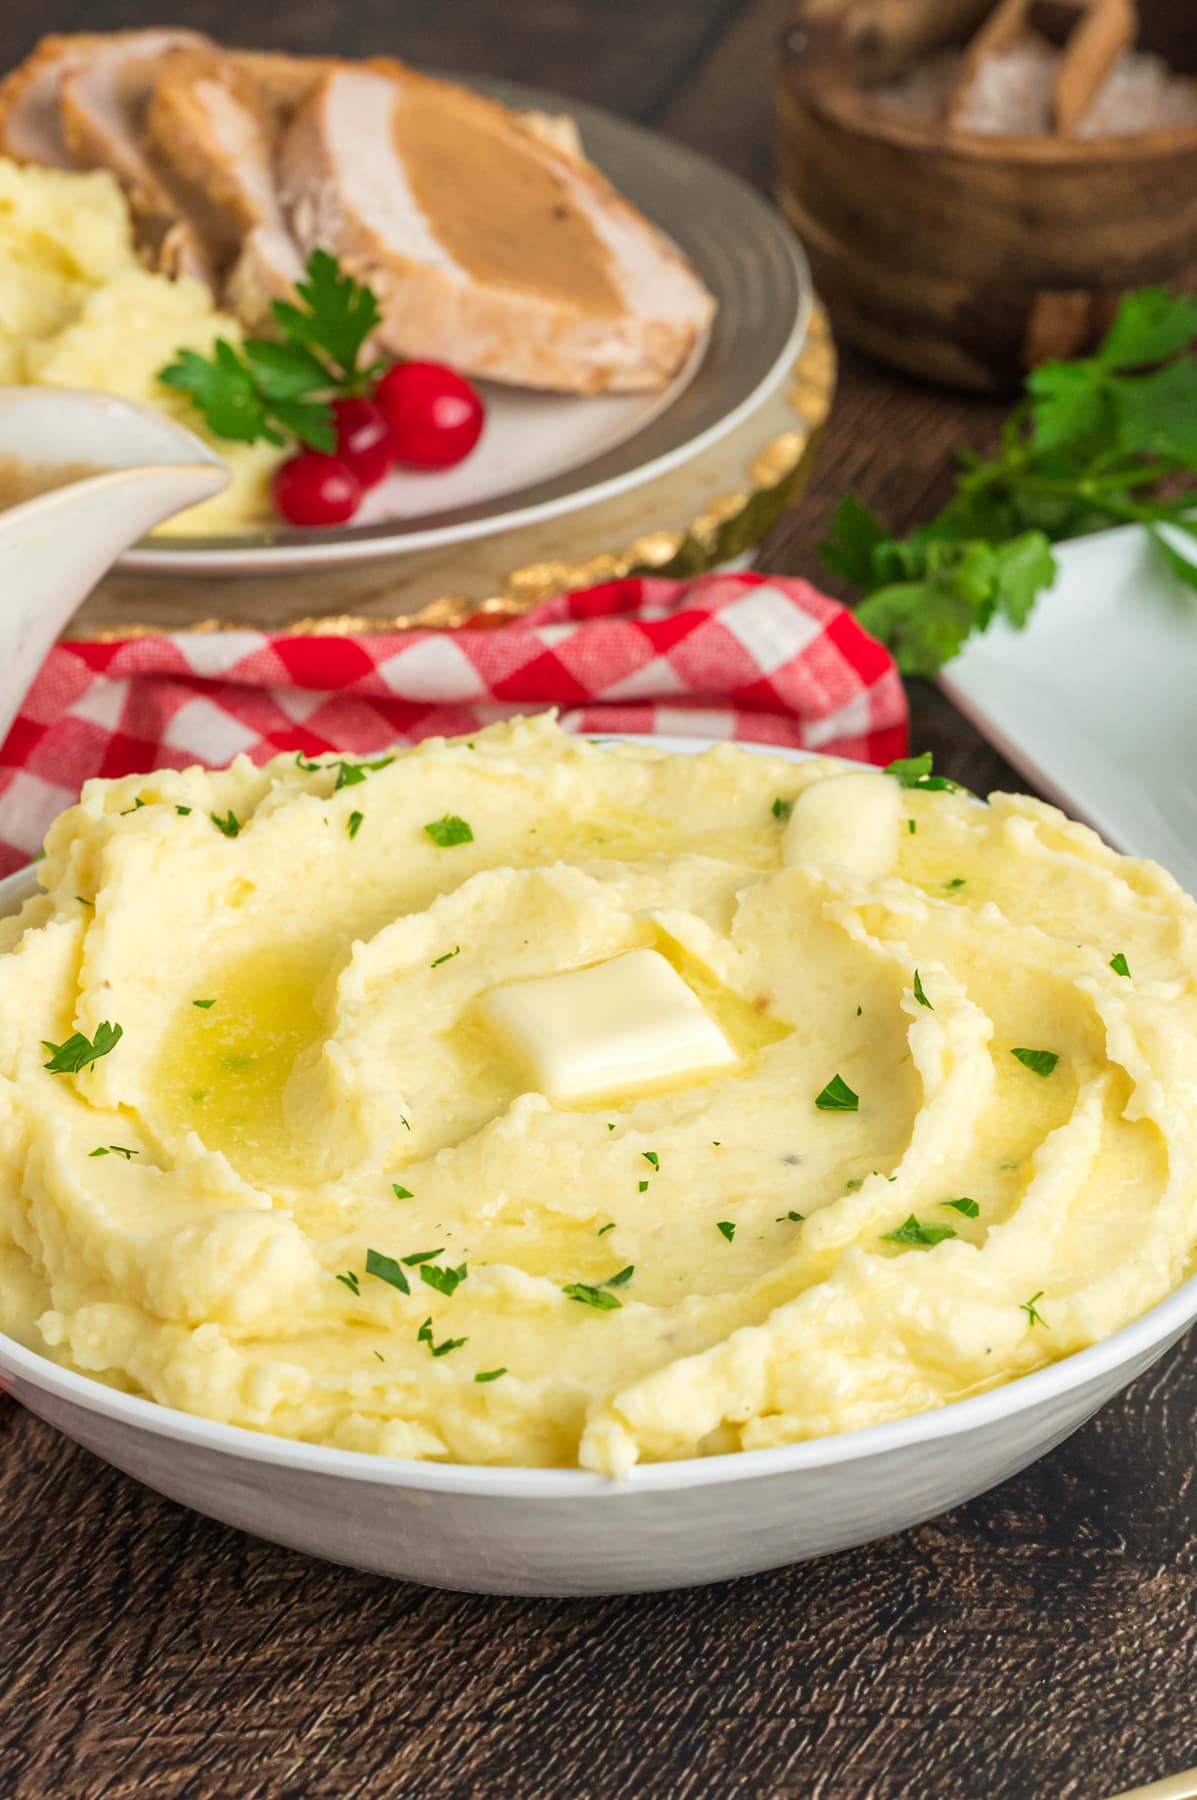 Angled view of a bowl of creamy mashed potatoes topped with a dab of butter